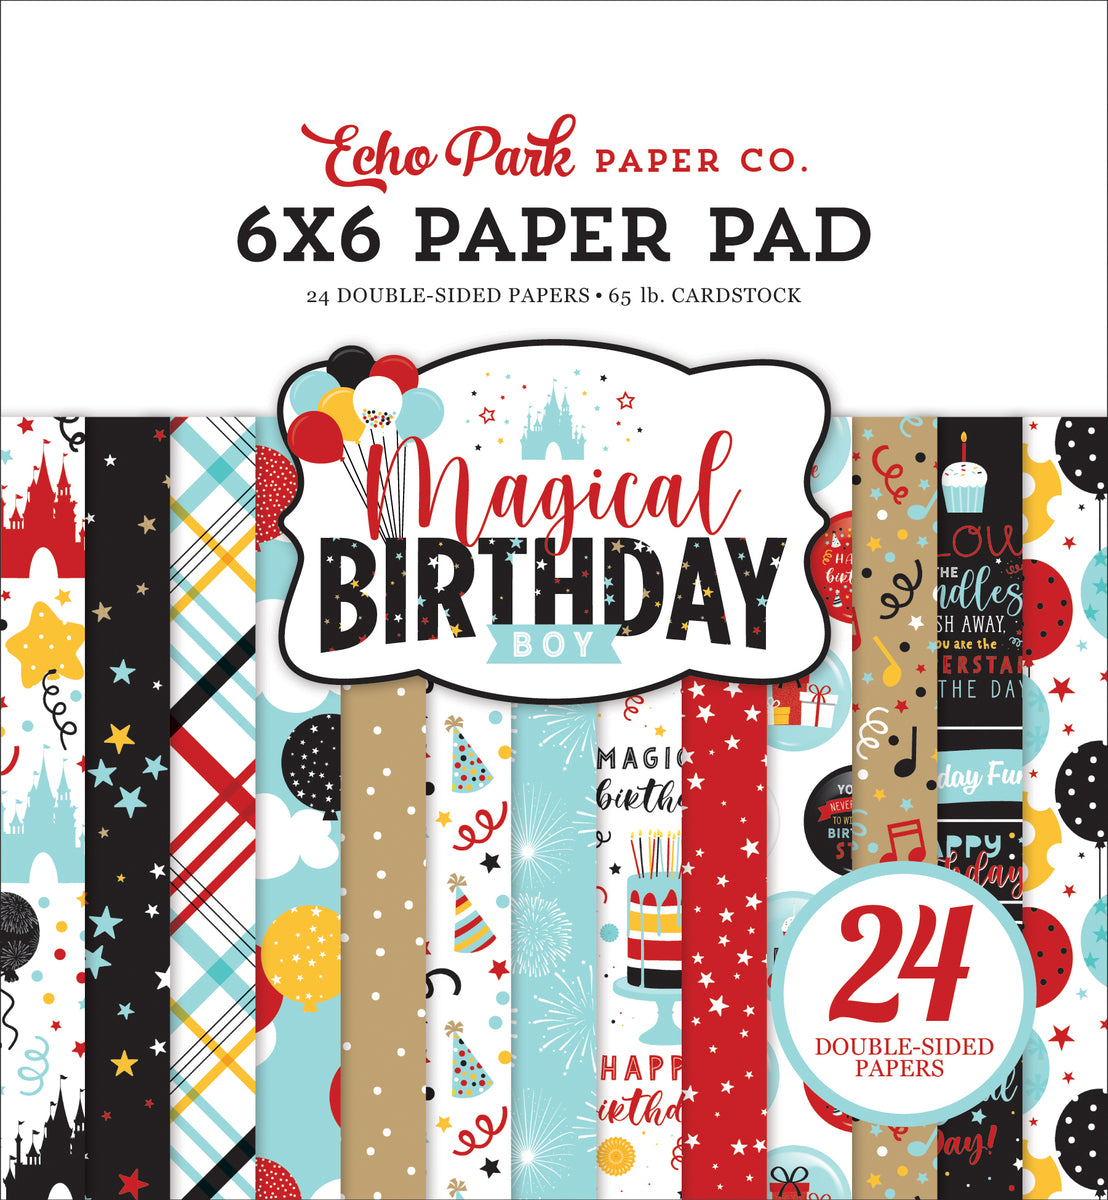 MAGICAL BIRTHDAY BOY - 6x6 pad with 24 double-sided papers with birthday theme - Echo Park Paper